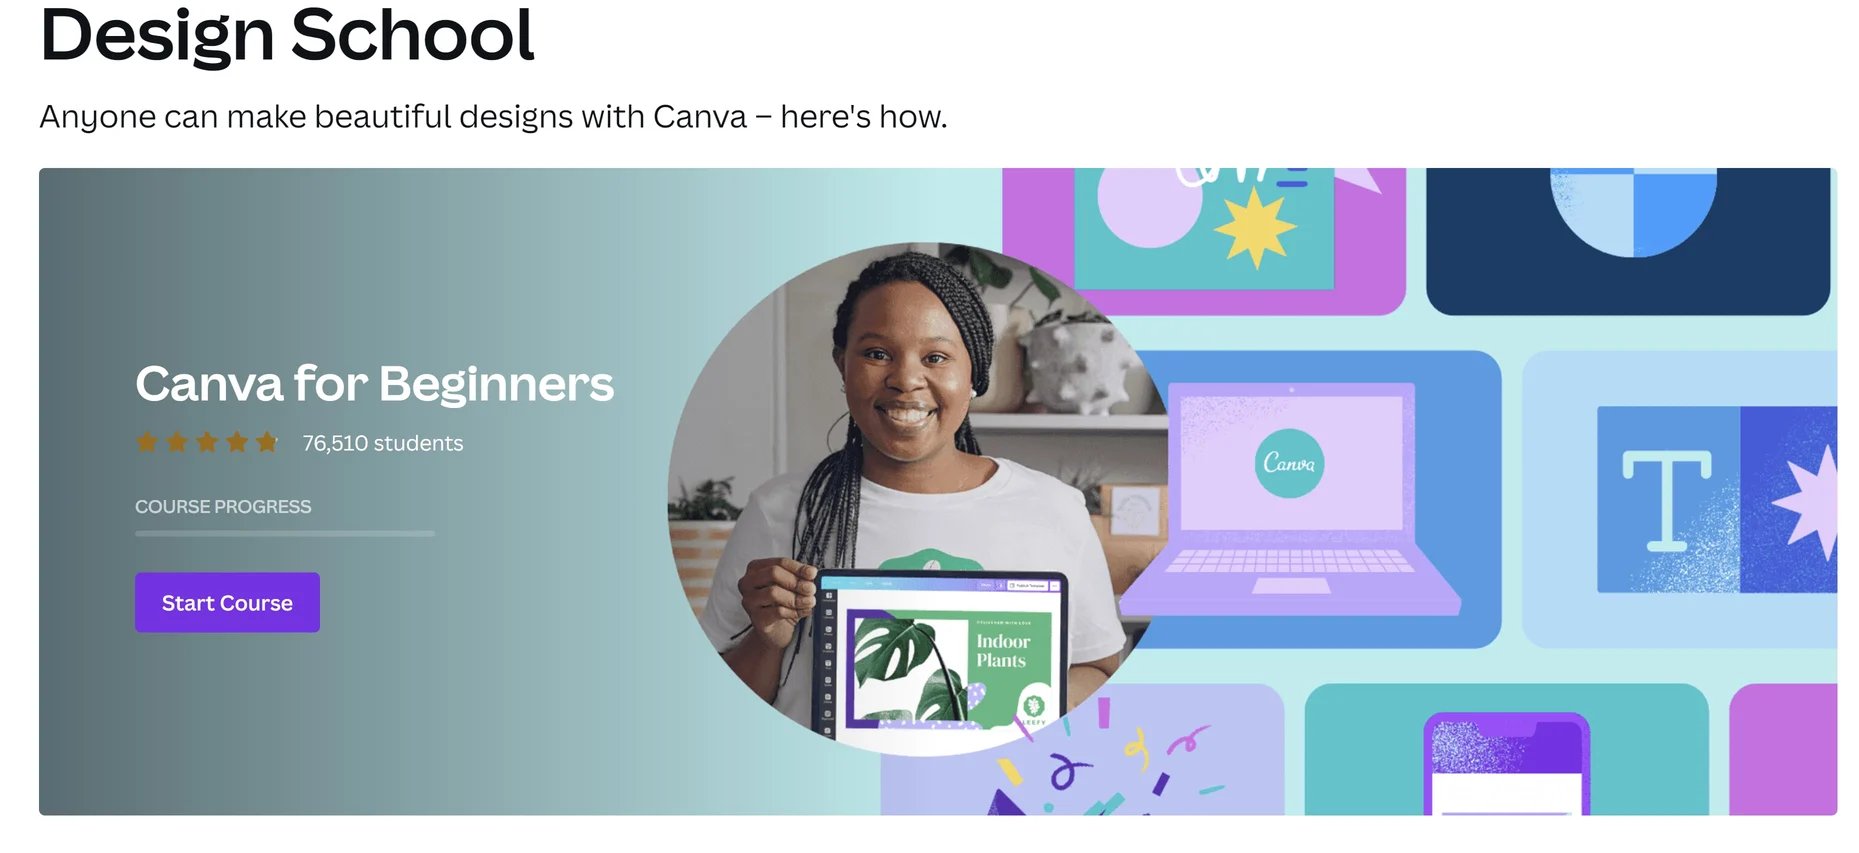 Canva Design School is an example of content marketing